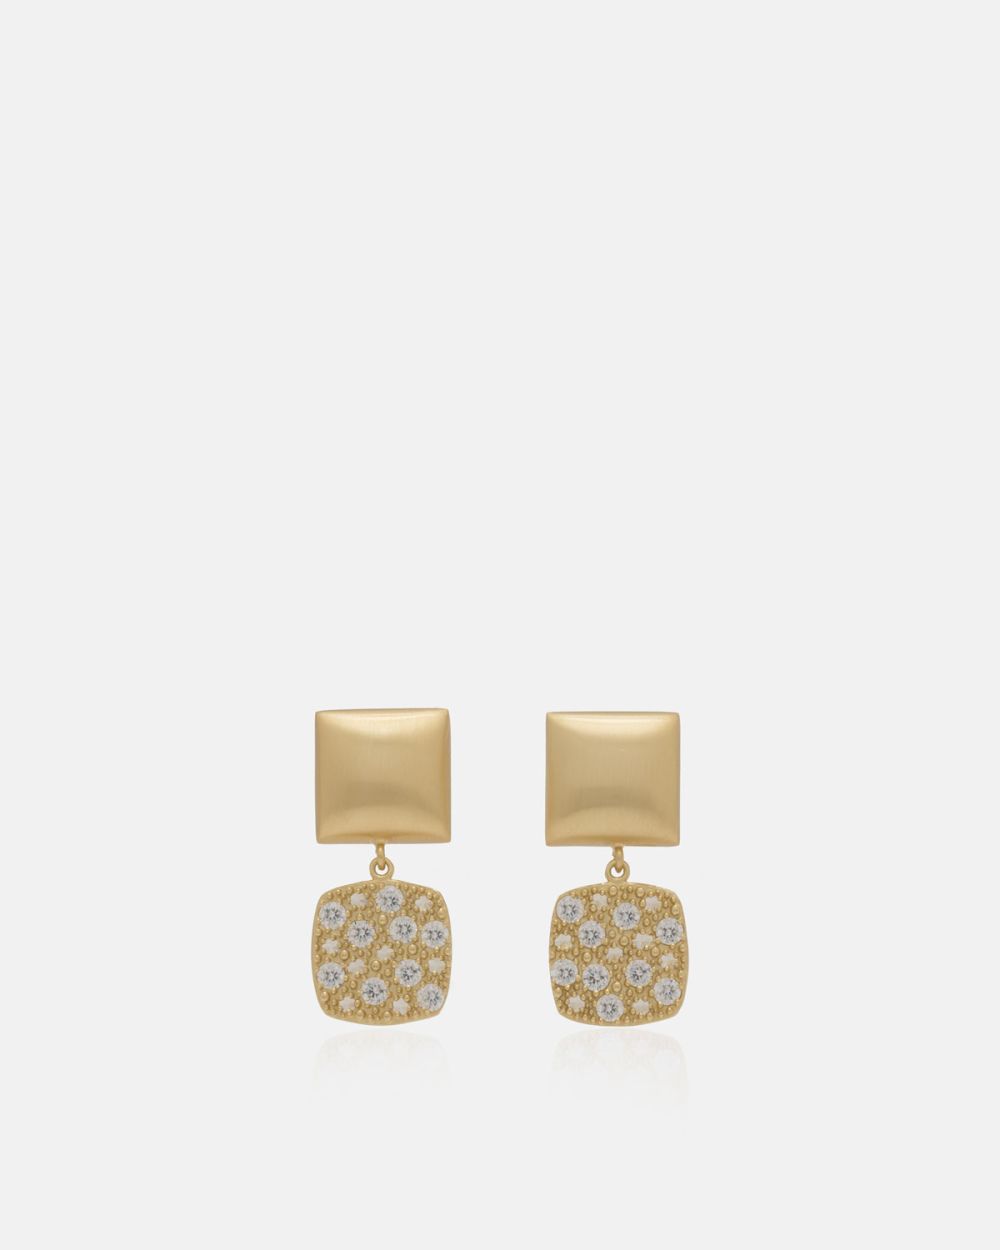 Superb Earrings in Gold Plated Silver with Zirconias